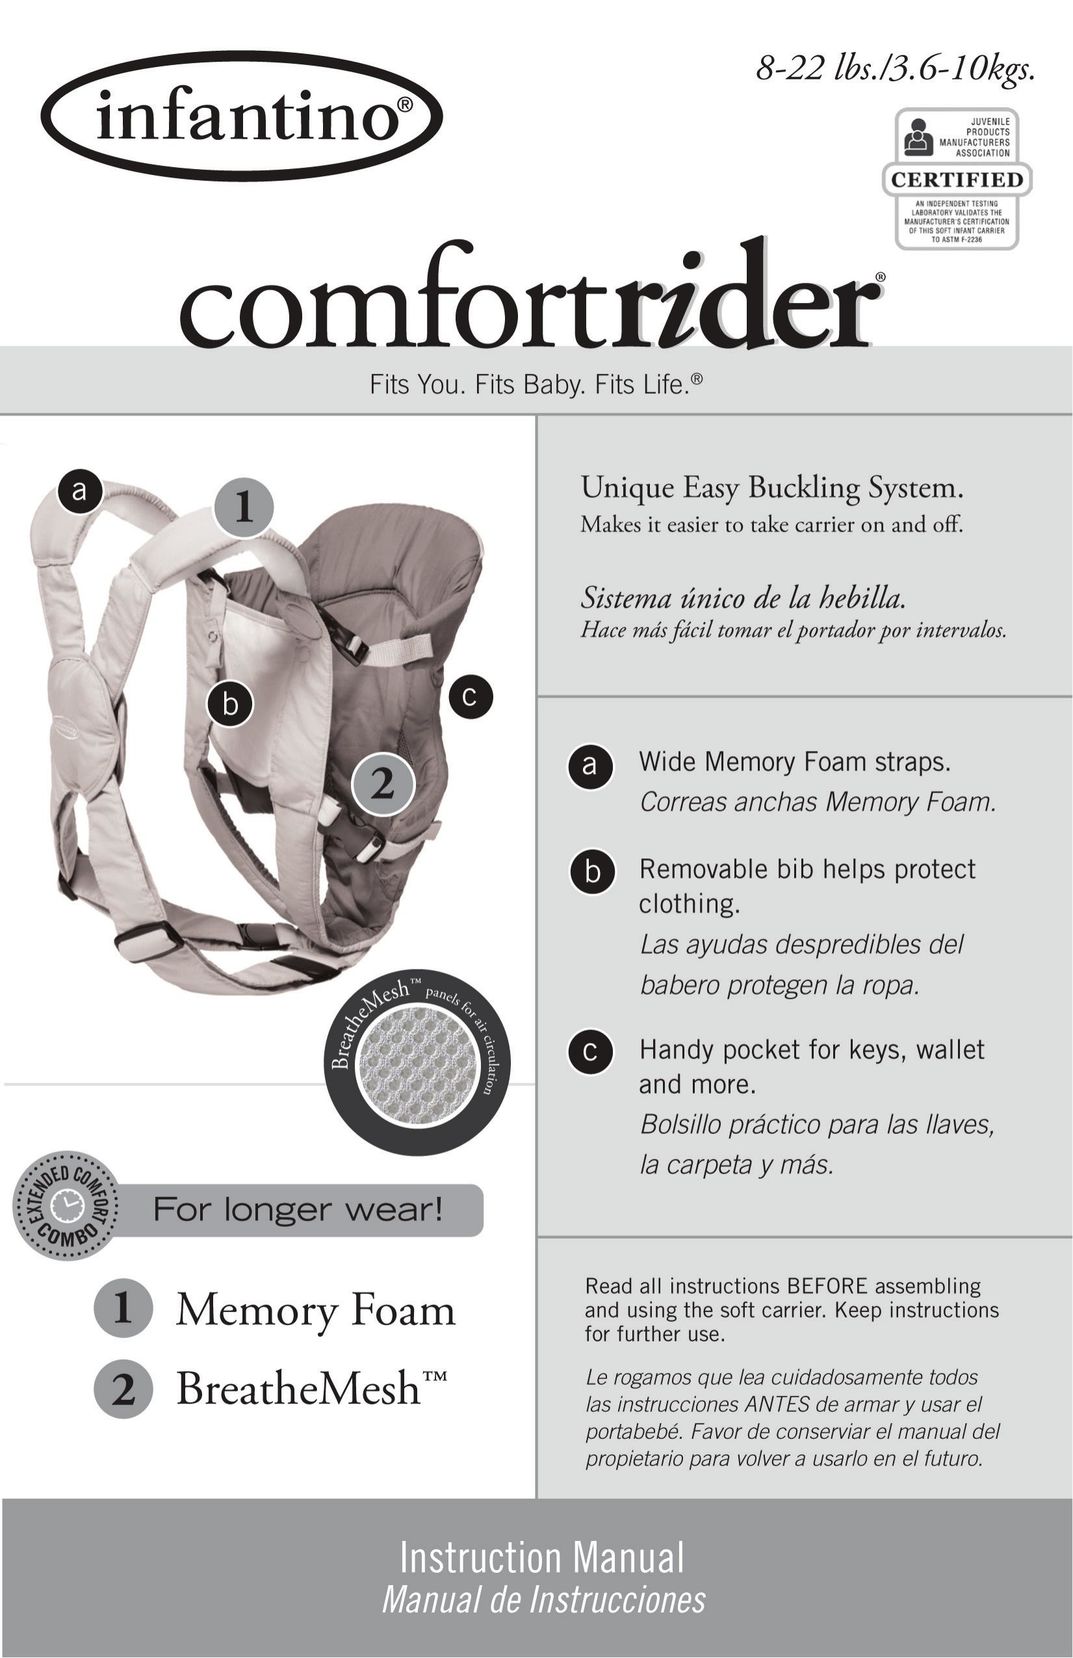 Infantino Comfort Rider Baby Carrier User Manual